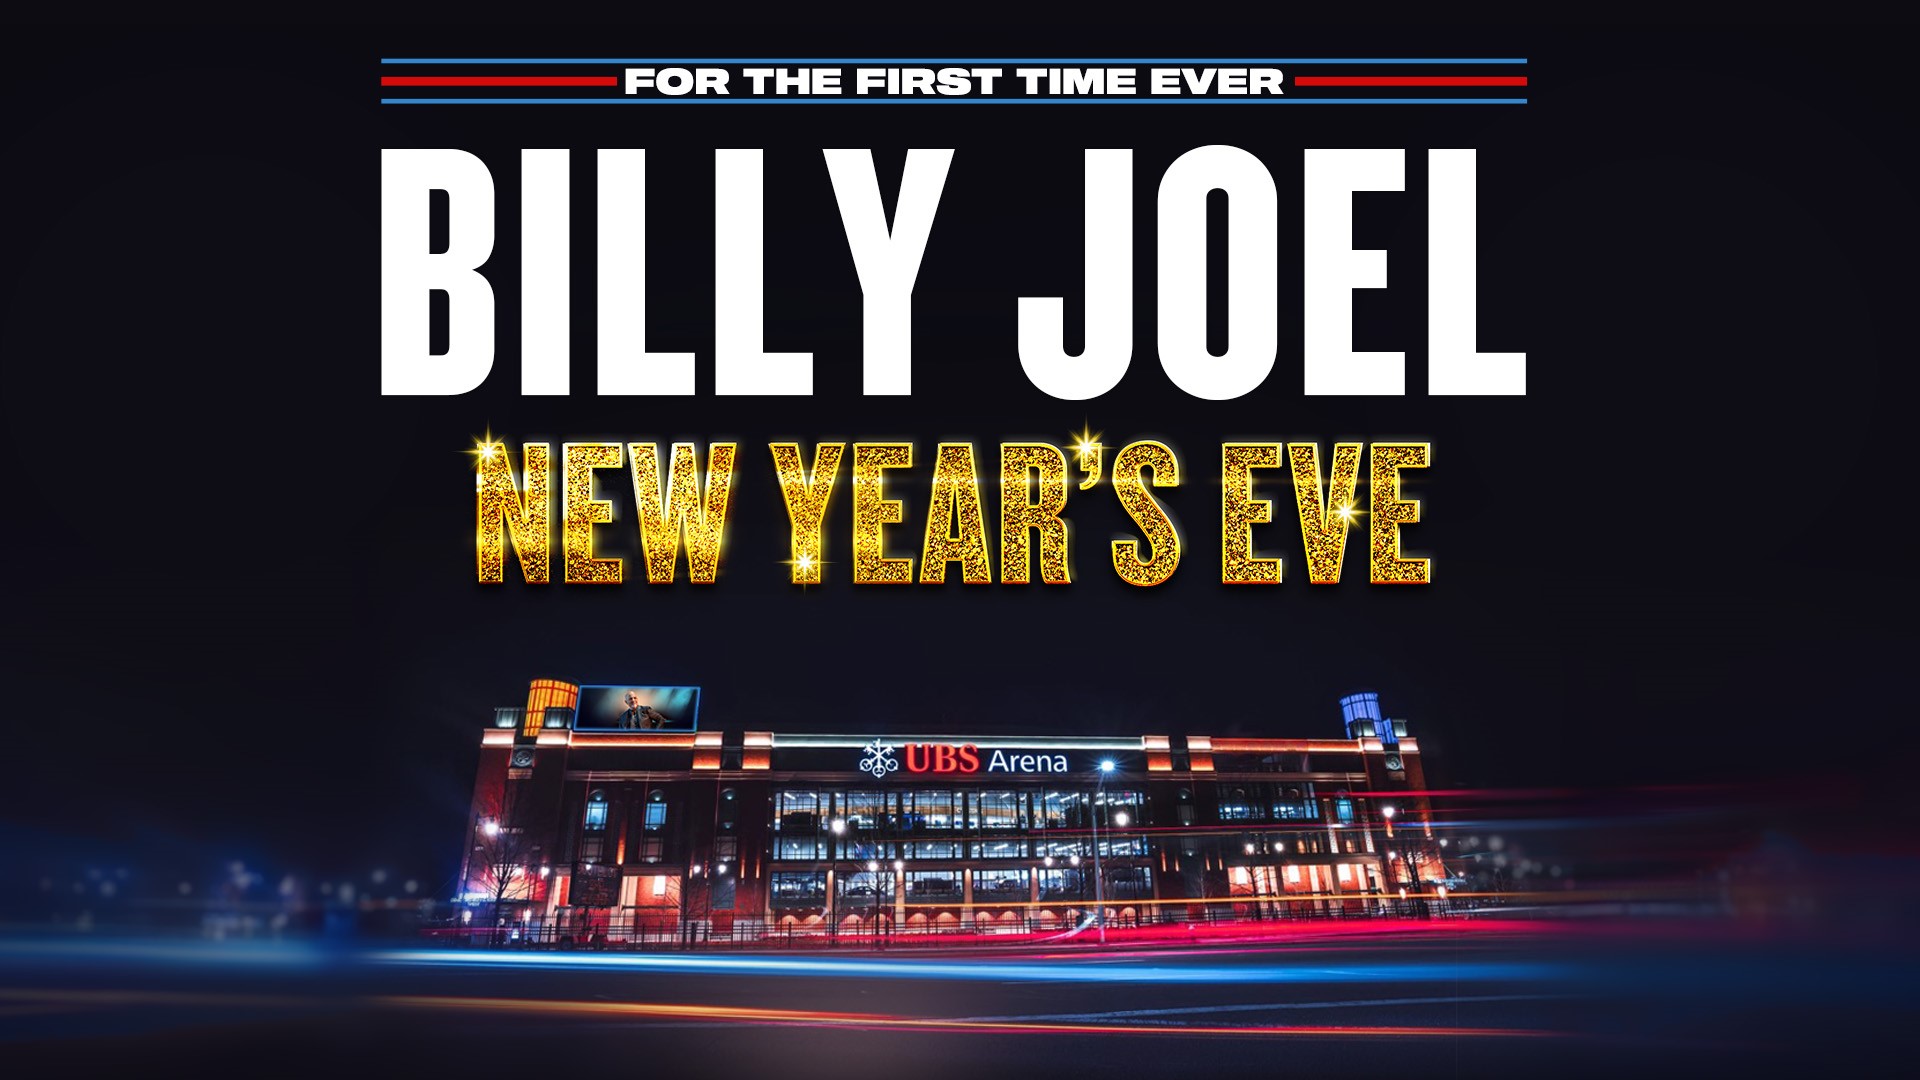 Billy Joel at UBS on New Year’s Eve